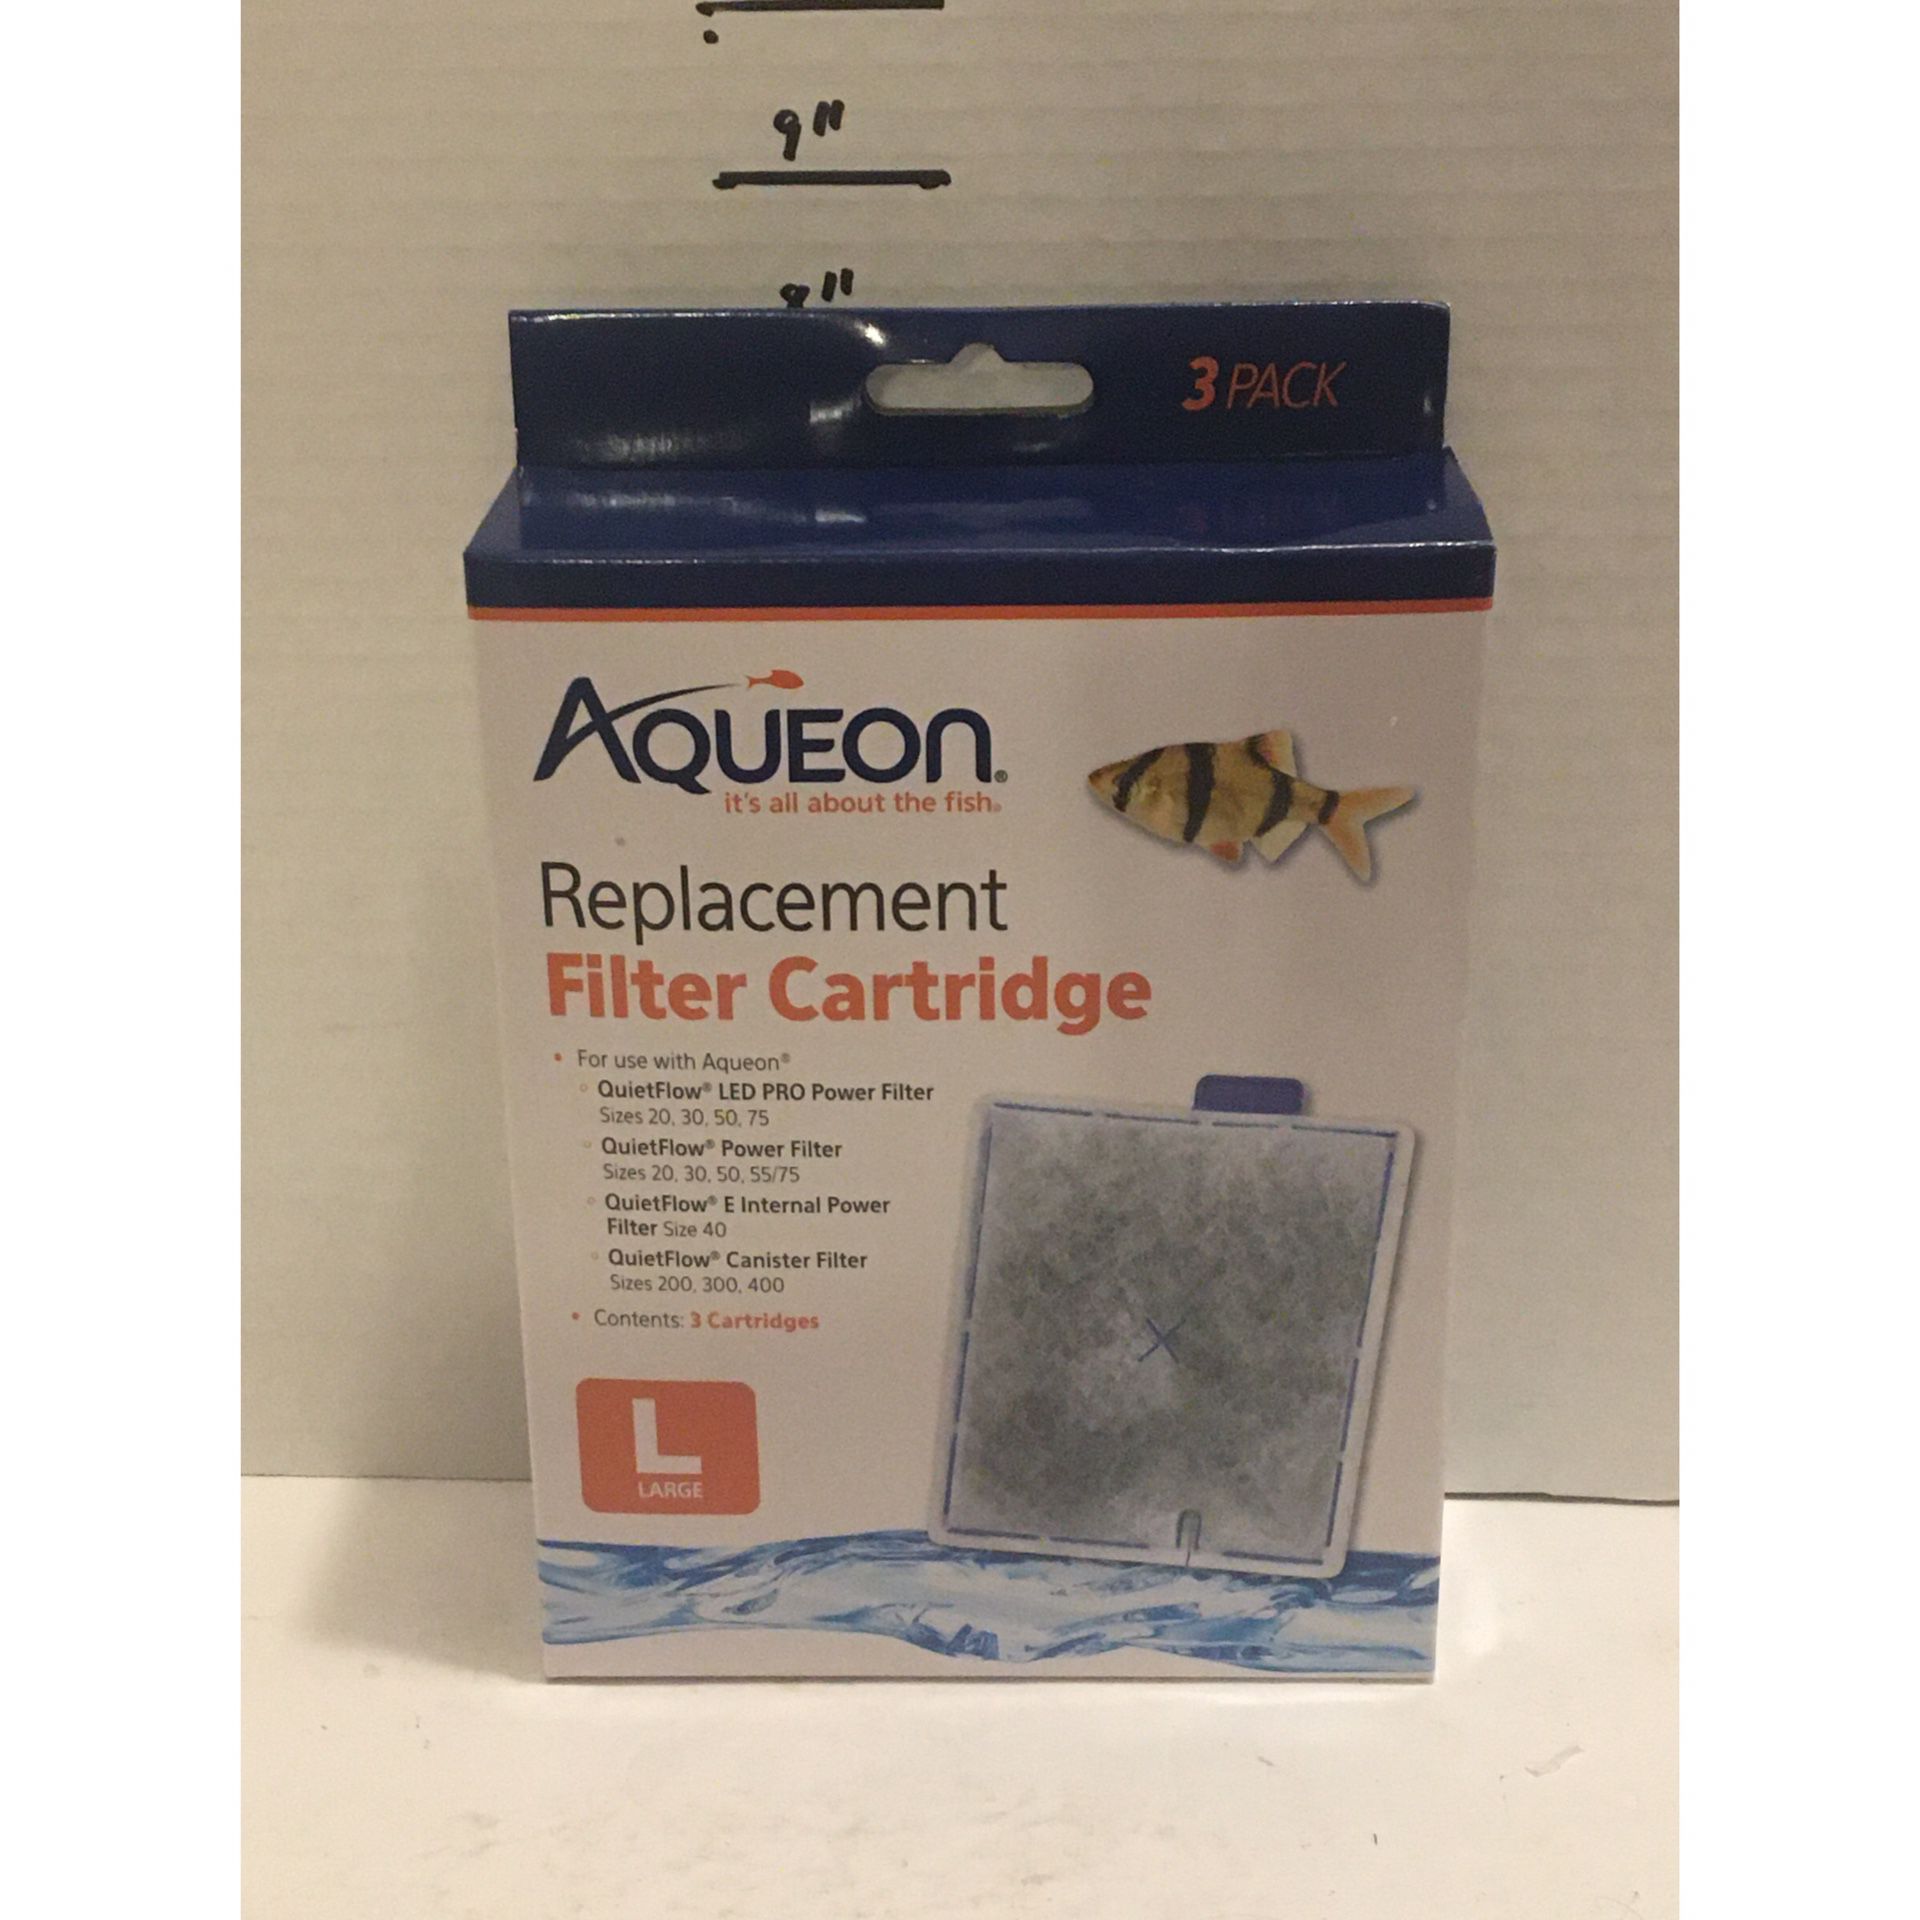 Aqueon Replacement Filter Cartridges Size Large 3 Pack